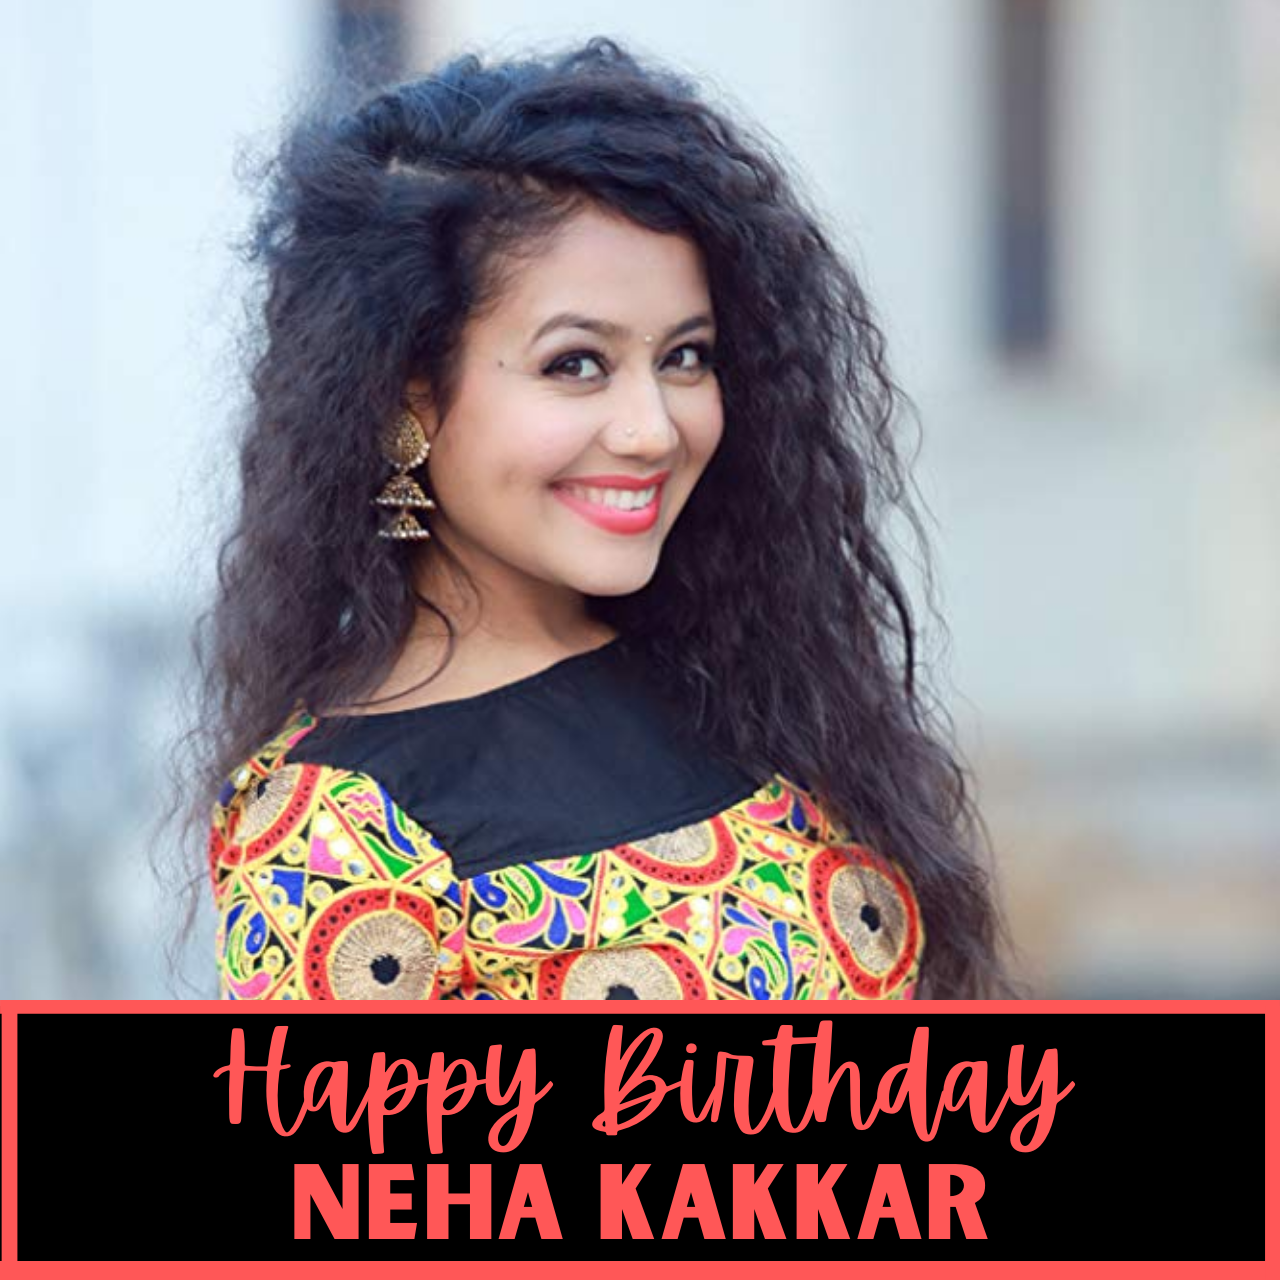 Happy Birthday Neha Kakkar: Wishes, Quotes, Images, Messages, Posters to greet Lead Female Singer